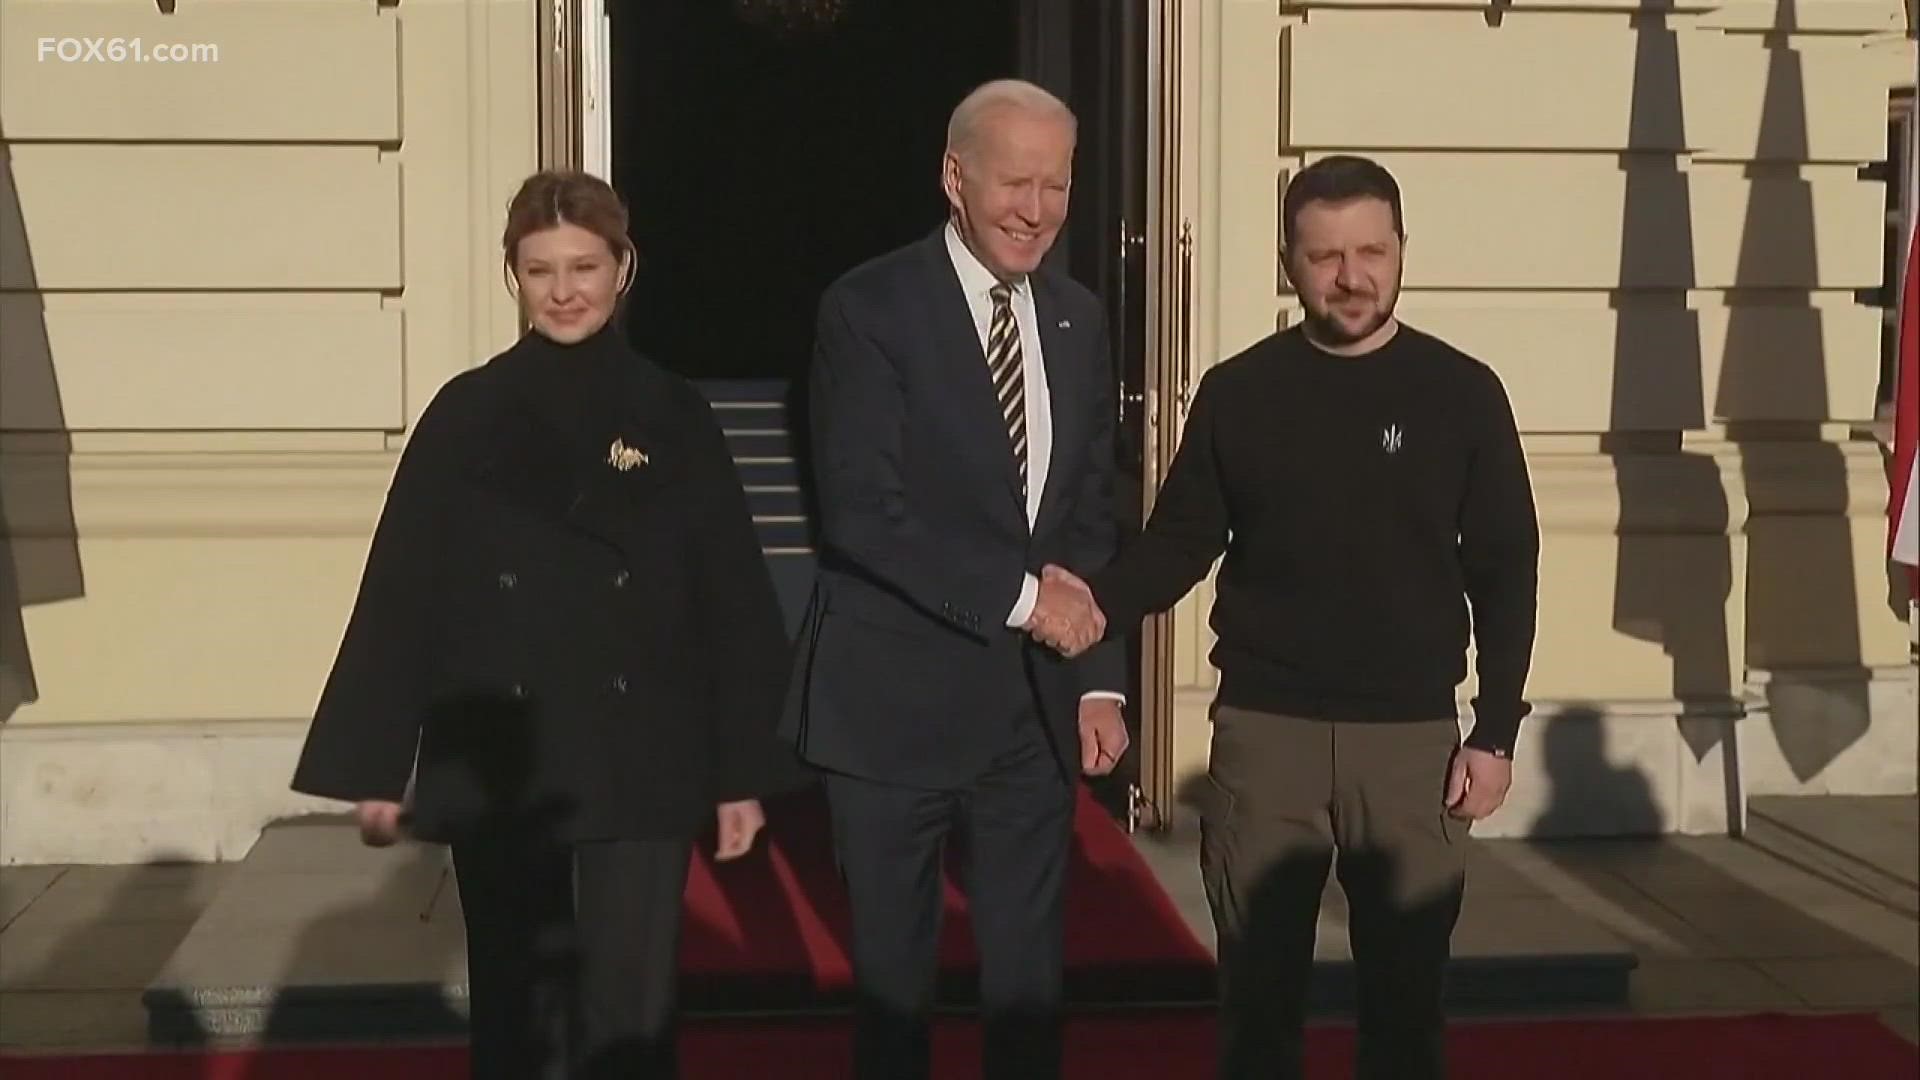 Friday marks one year since Russia invaded Ukraine, and while the battle rages on, President Biden made a surprise visit to Ukraine on Monday.